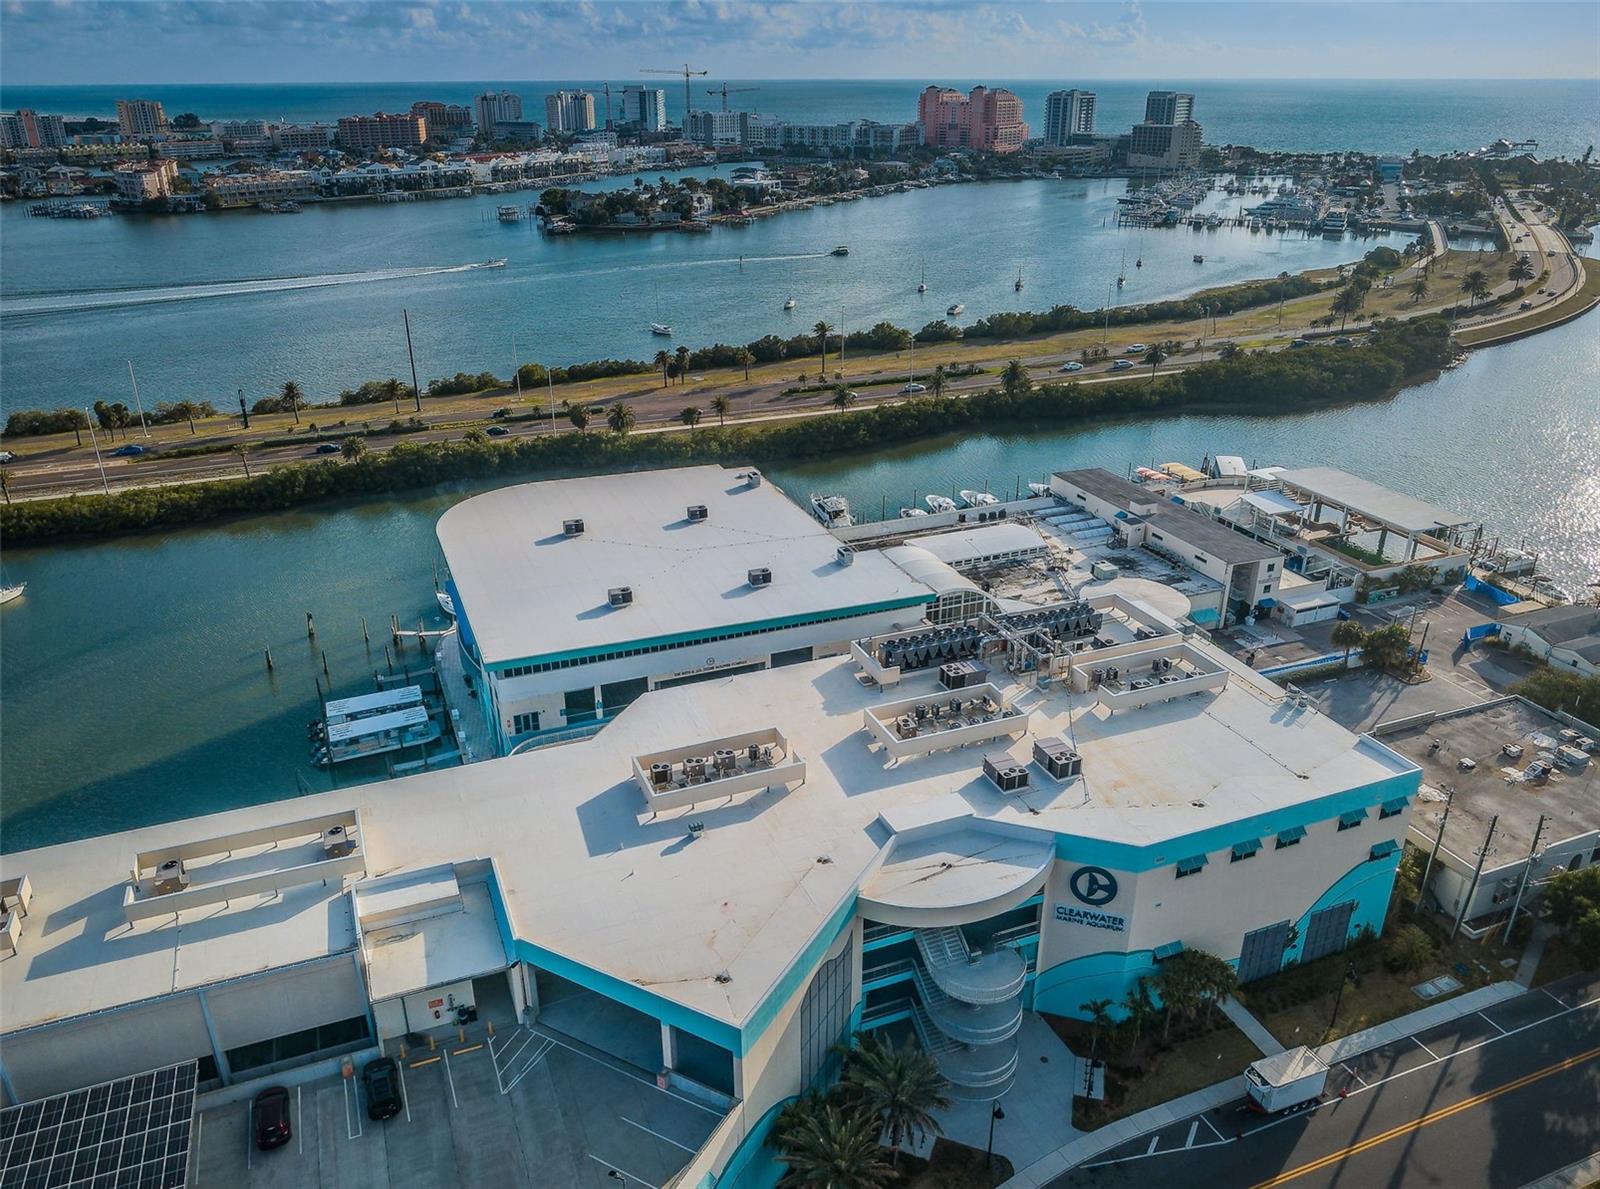 From above, the aquarium stands as a beacon of marine conservation nestled within the vibrant coastal community.